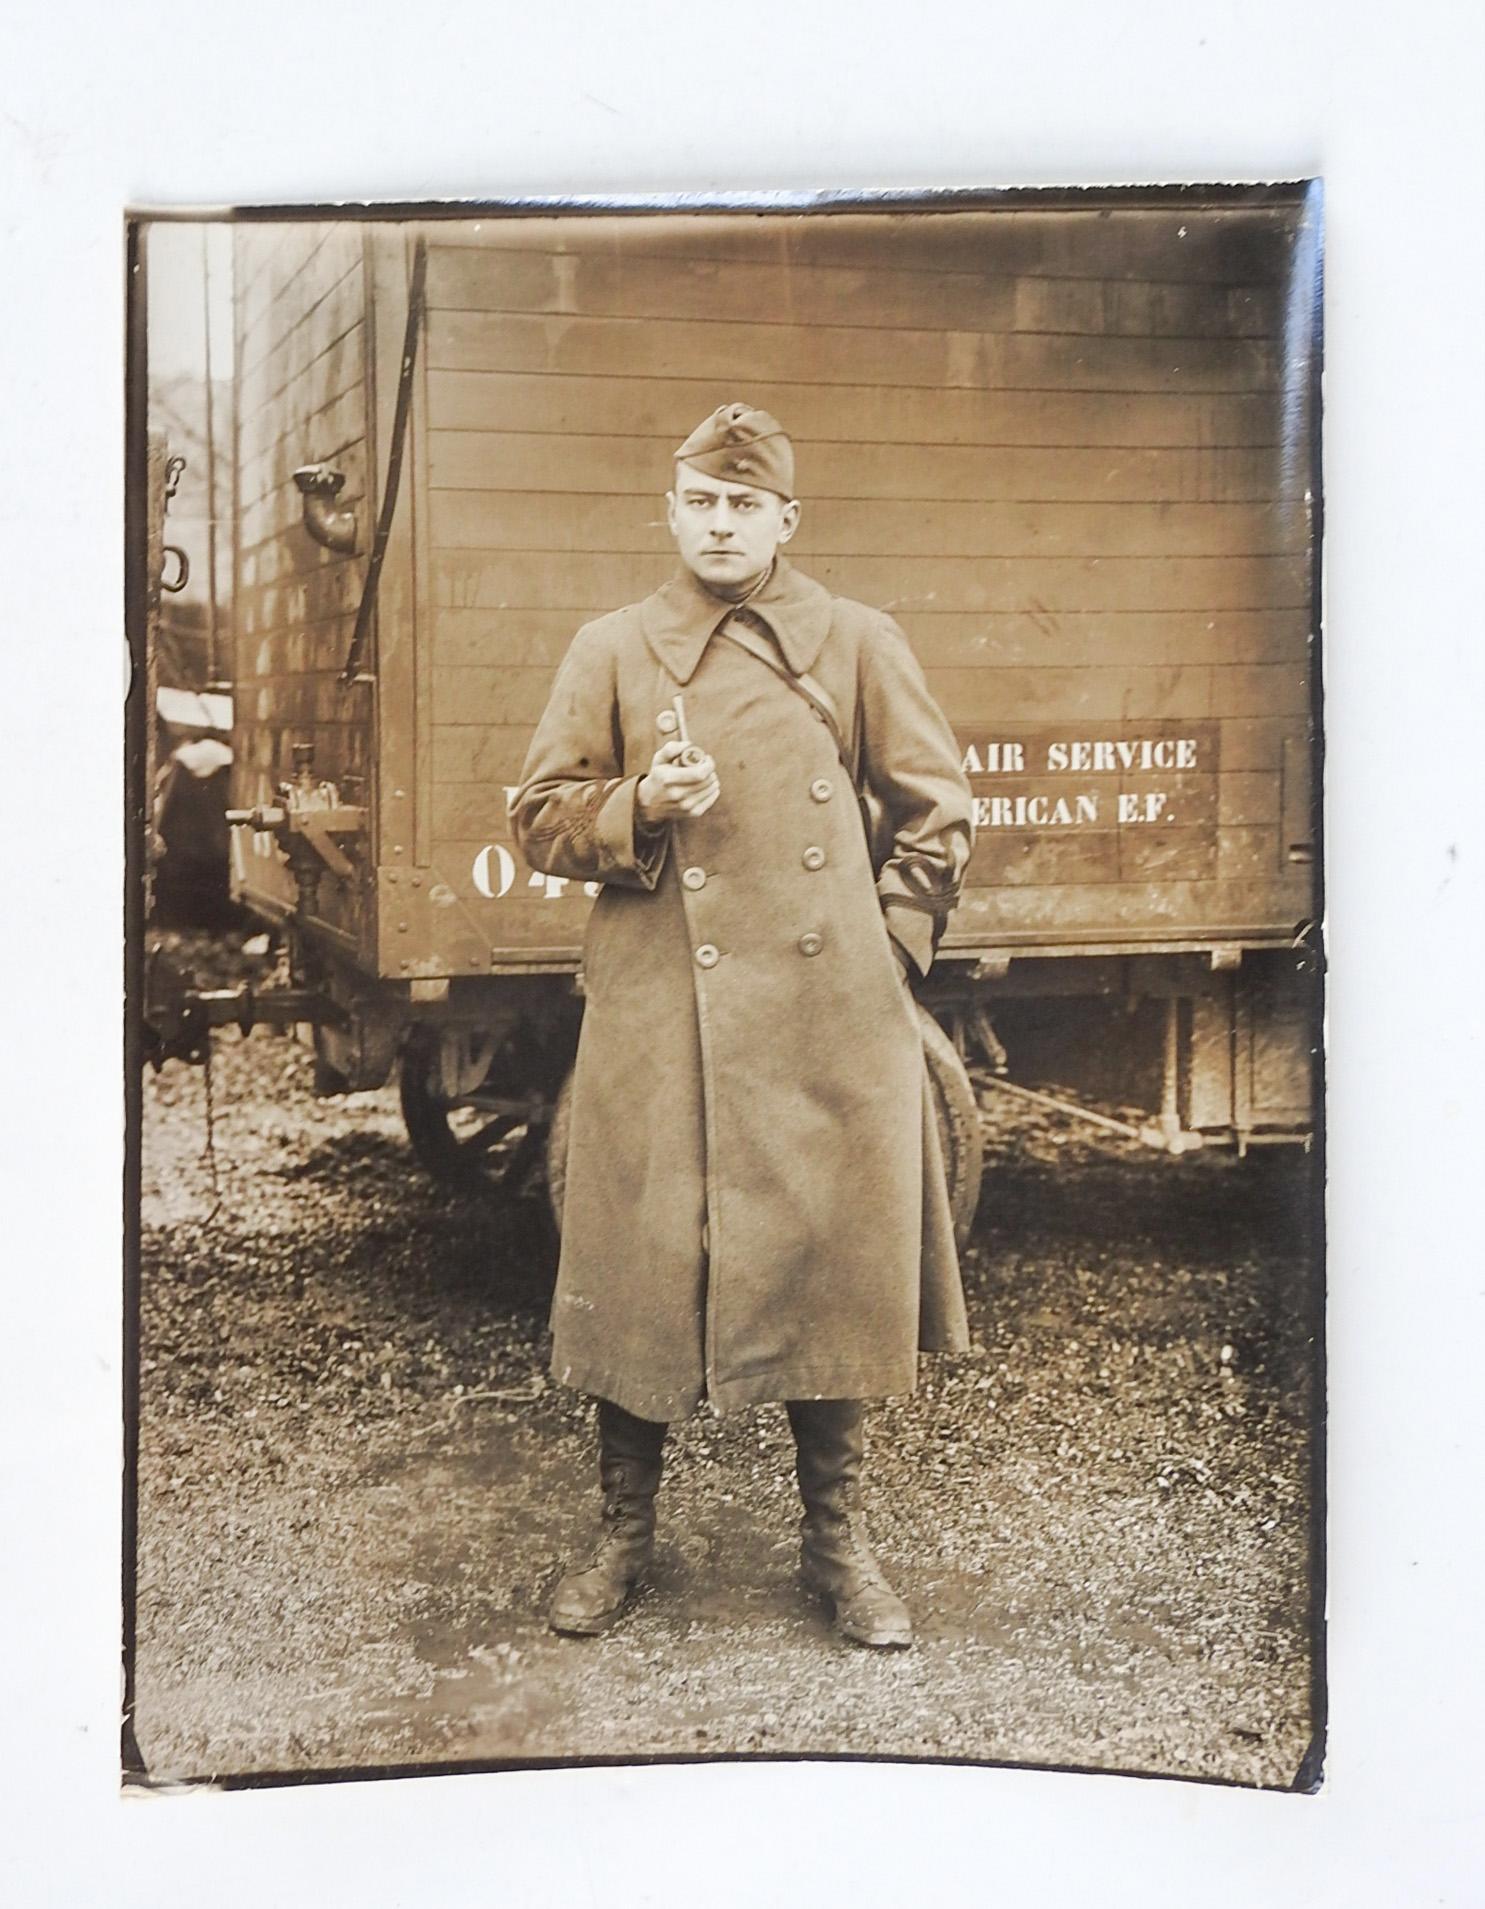 Circa 1918 silver gelatin photograph of US soldier or pilot. Standing in front of a transport for Air Service American Expeditionary Force. Lace up boots, heavy wool coat with braid at sleeves and cap. Holding a pipe and with a tough expression,